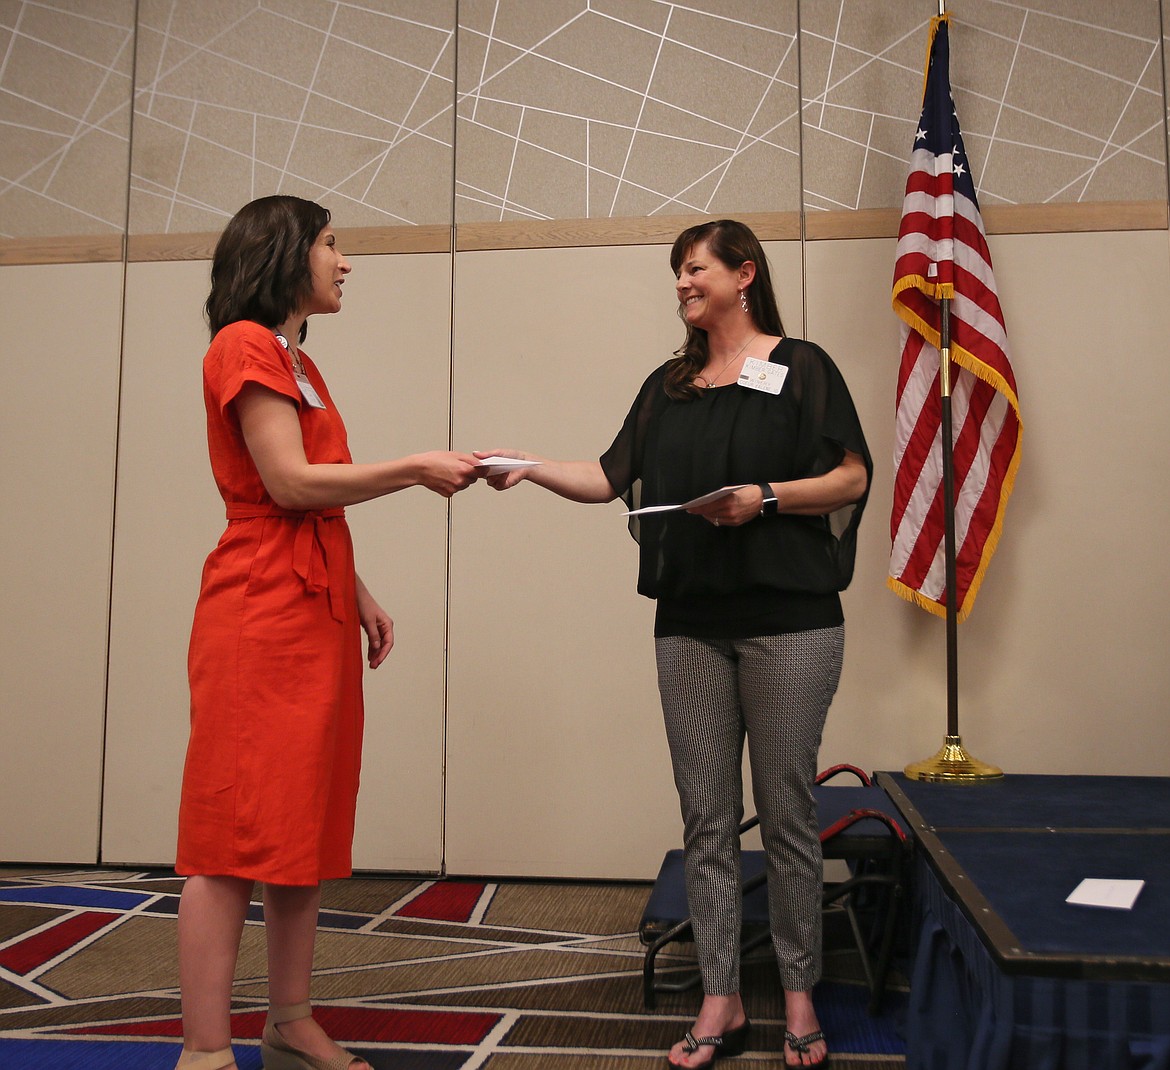 Tarah Boerner, registered dietitian nutritionist with Panhandle Health District, left, accepts a check for $1,000 from Rotary President Kimber Gates during a grant distribution in The Coeur d'Alene Resort on Friday. The funds will go to Panhandle's Parents Leading Active Youth program, which empowers parents to serve as positive role models and lead their children in healthy habits. (DEVIN WEEKS/Press)